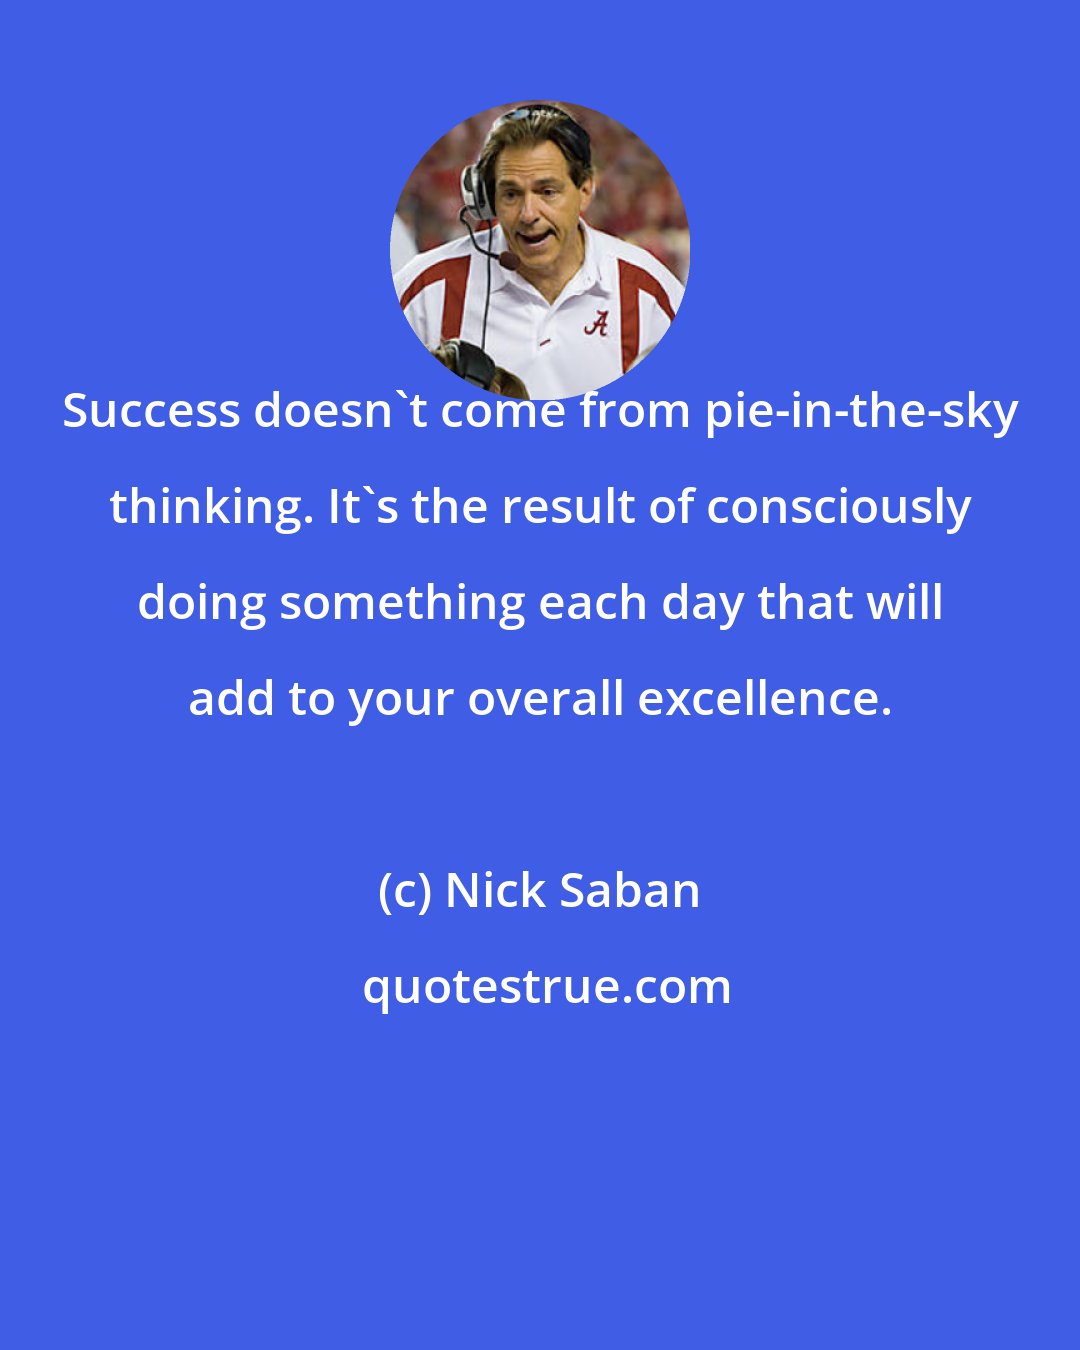 Nick Saban: Success doesn't come from pie-in-the-sky thinking. It's the result of consciously doing something each day that will add to your overall excellence.